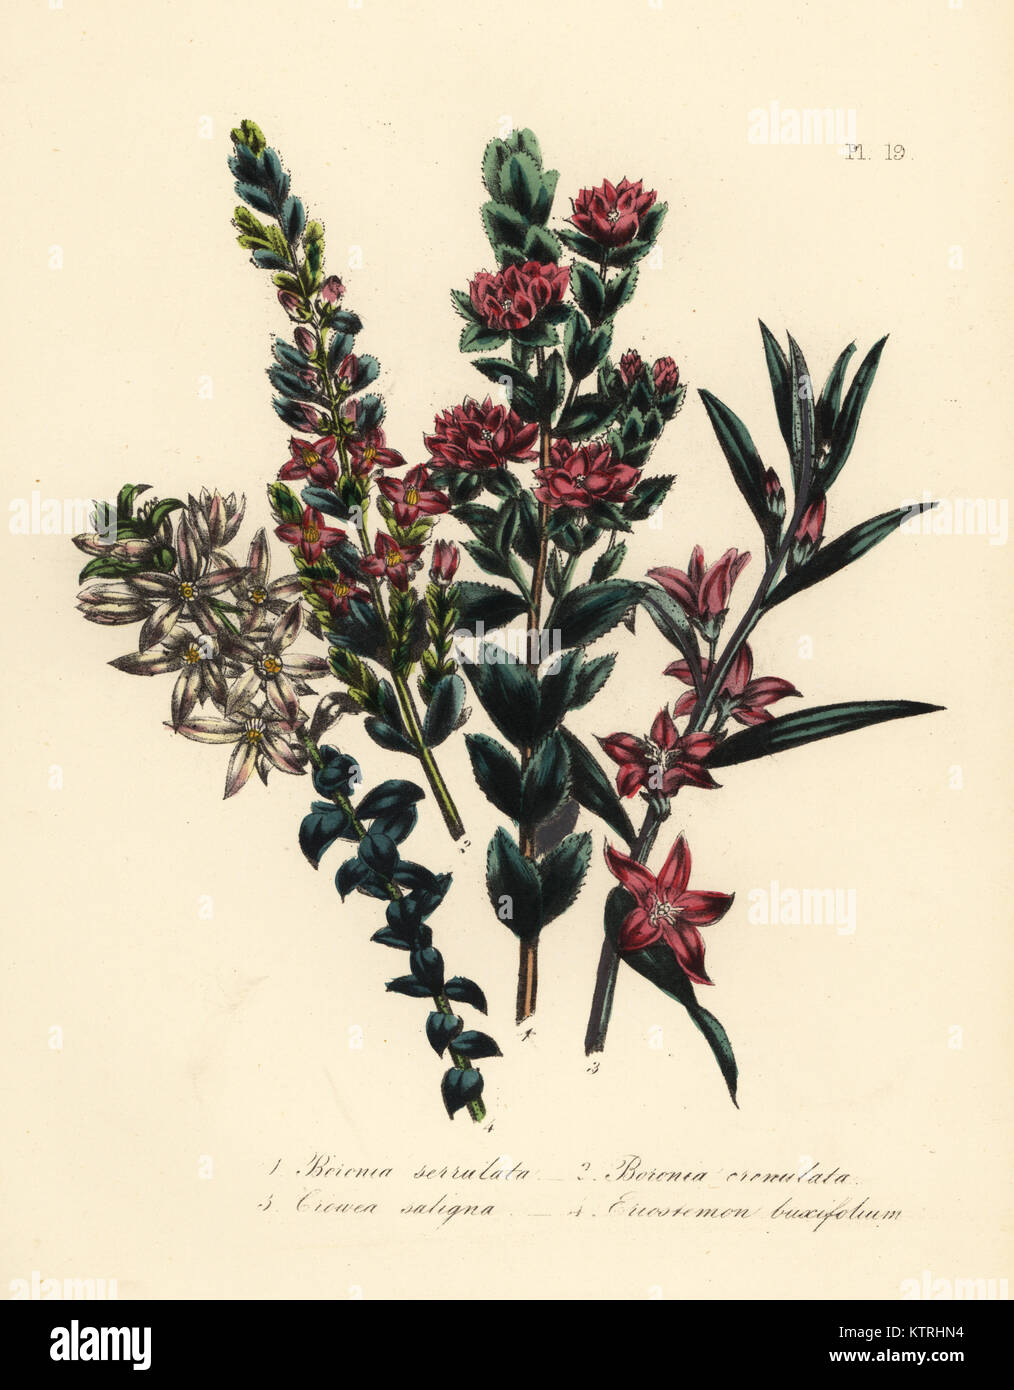 Saw-leaved boronia, Boronia serrulata, crenated, Boronia crenulata, willow-leaved crowea, Crowea saligna, and box-leaved eriostemon, Eriostemon buxifolium. Handfinished chromolithograph by Noel Humphreys after an illustration by Jane Loudon from Mrs. Jane Loudon's Ladies Flower Garden or Ornamental Greenhouse Plants, William S. Orr, London, 1849. Stock Photo